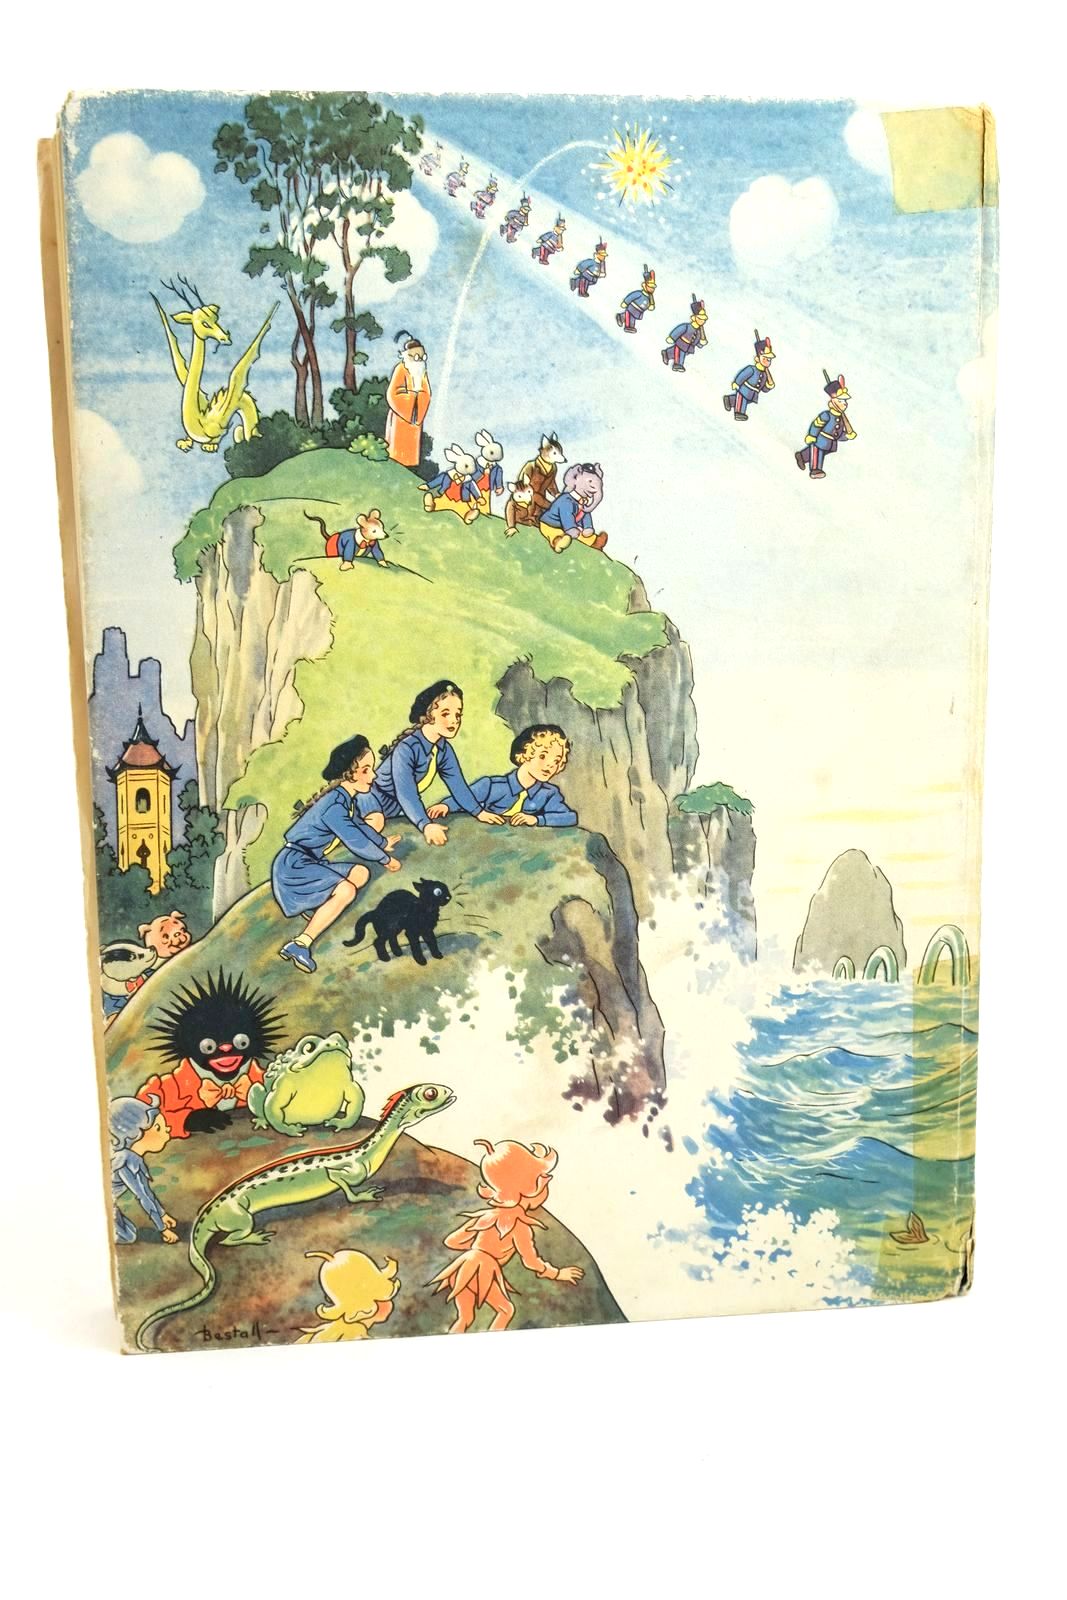 Photo of RUPERT ANNUAL 1950 - ADVENTURES OF RUPERT written by Bestall, Alfred illustrated by Bestall, Alfred published by Daily Express (STOCK CODE: 1321967)  for sale by Stella & Rose's Books